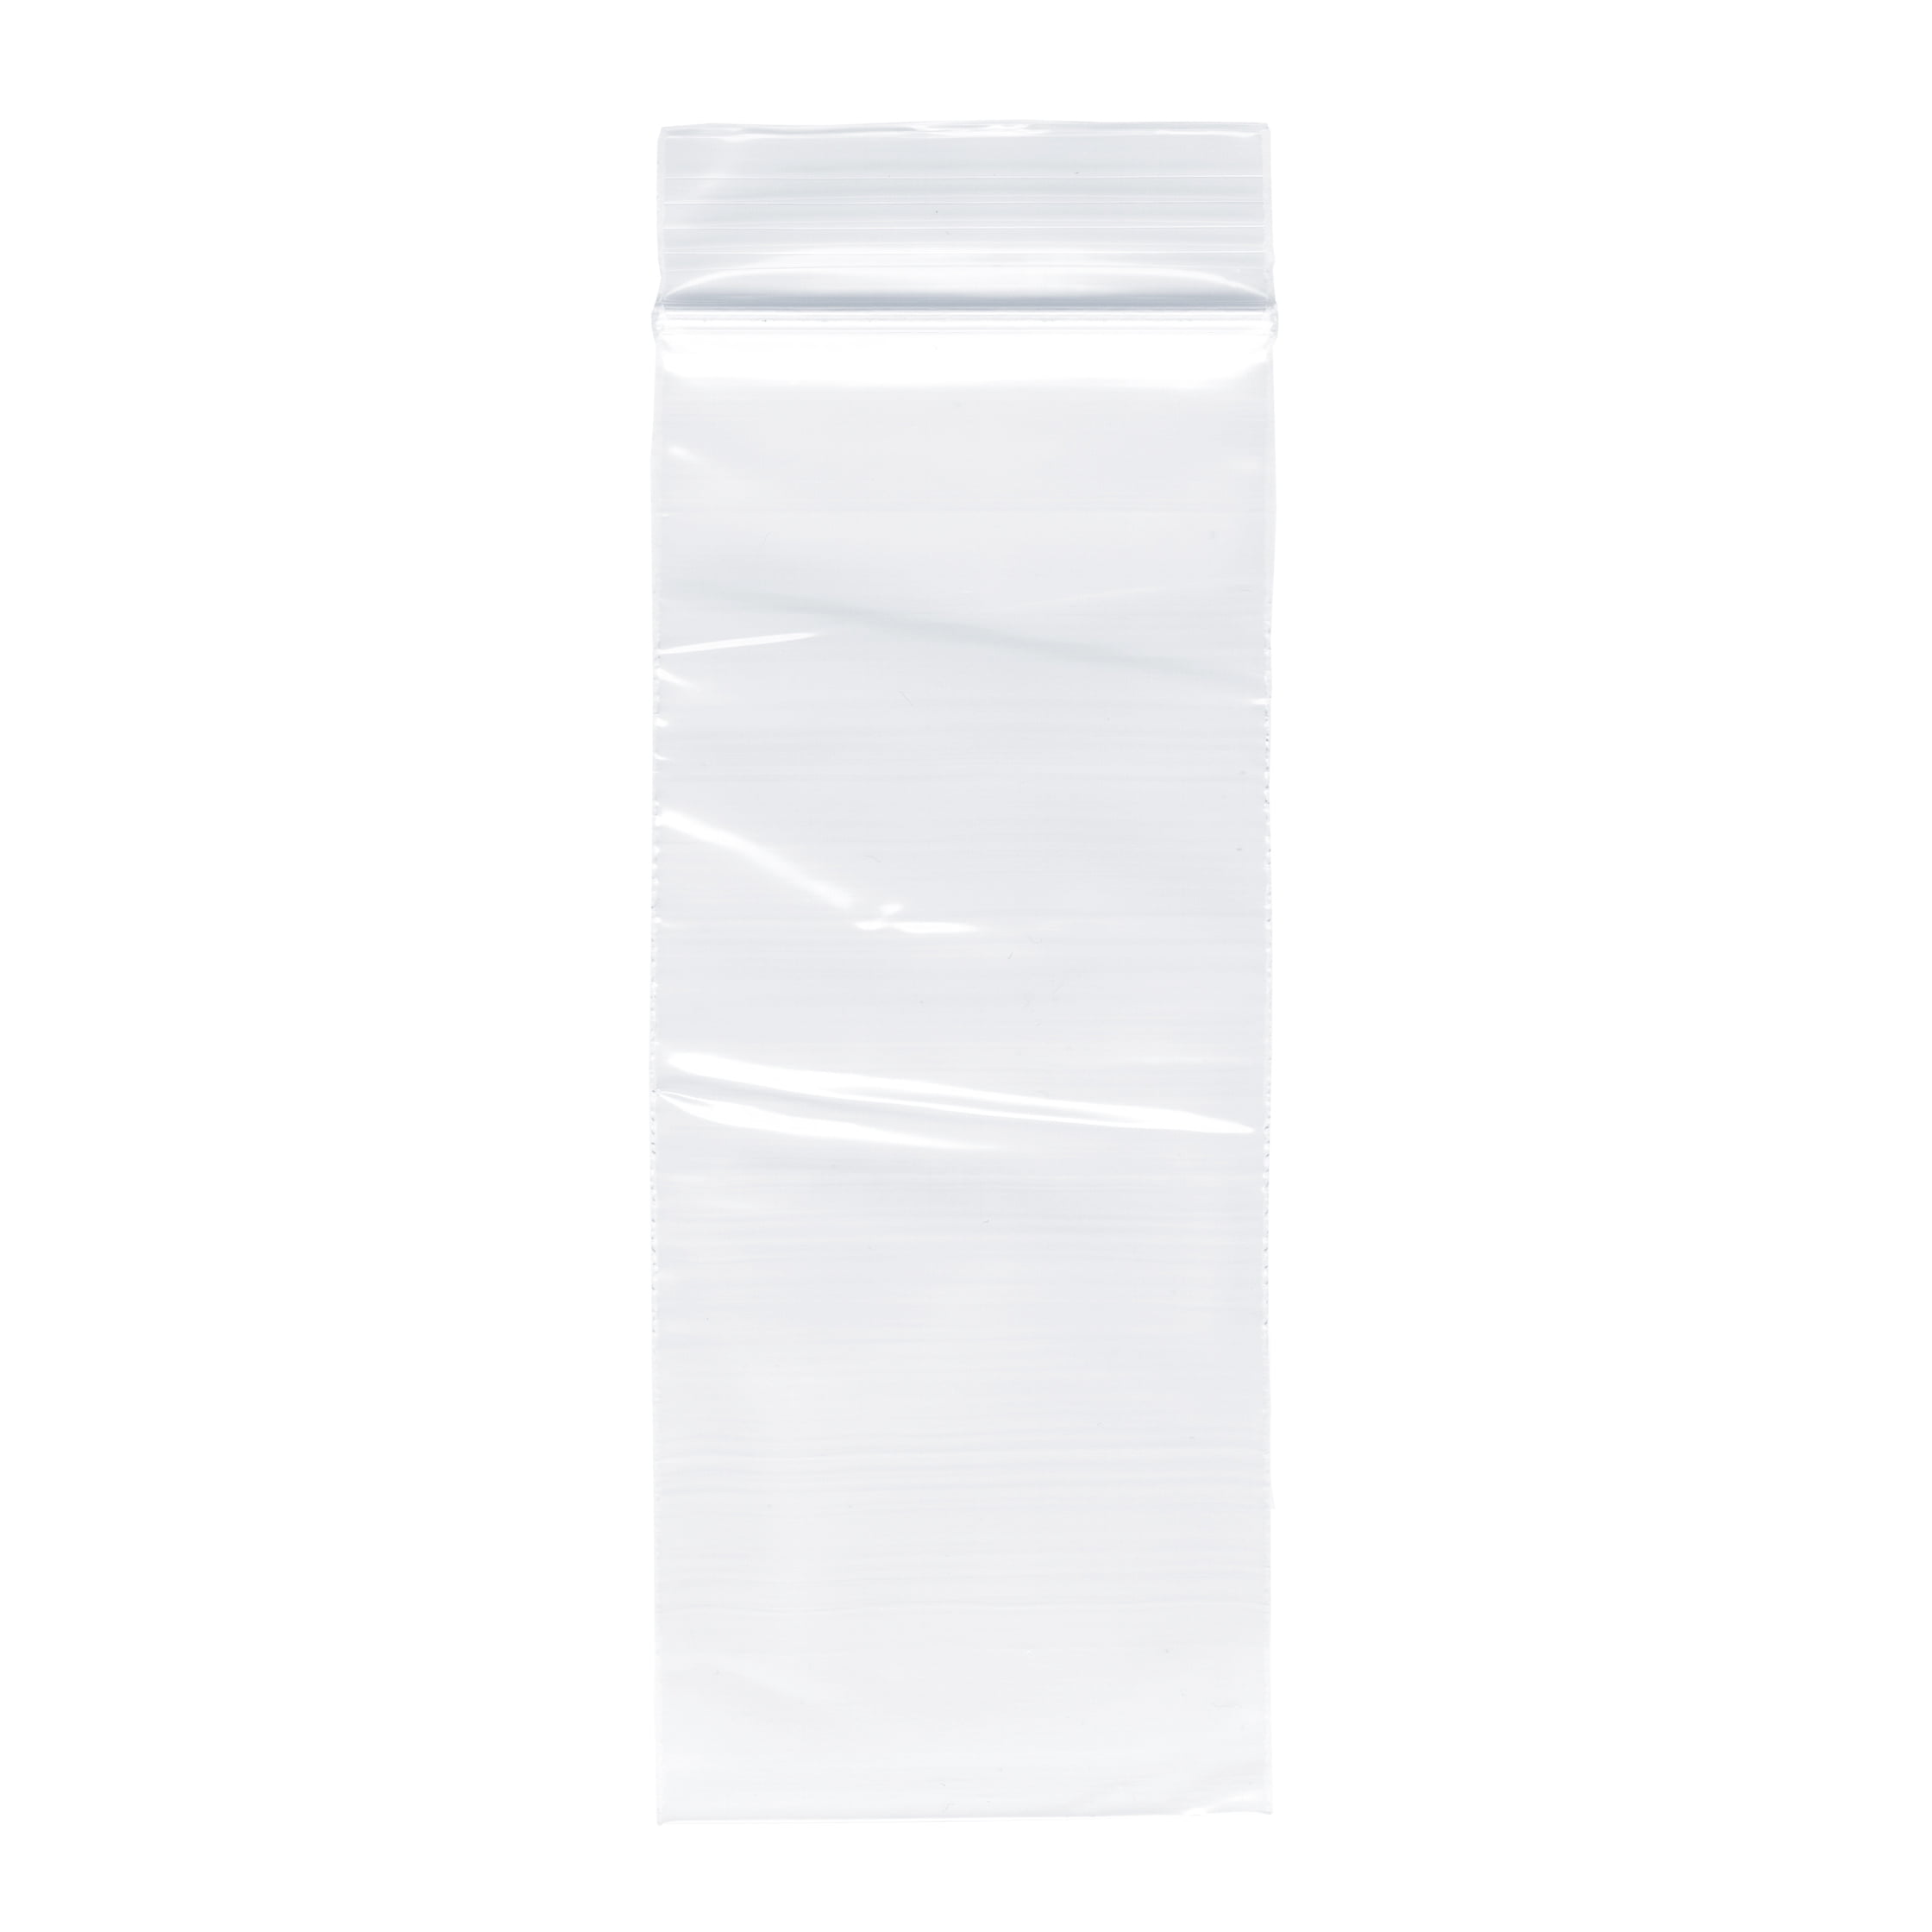 Clear Reclosable Bags 7" x 8" 2 Mil Plastic Zipper for Jewelry 12000 Pieces 